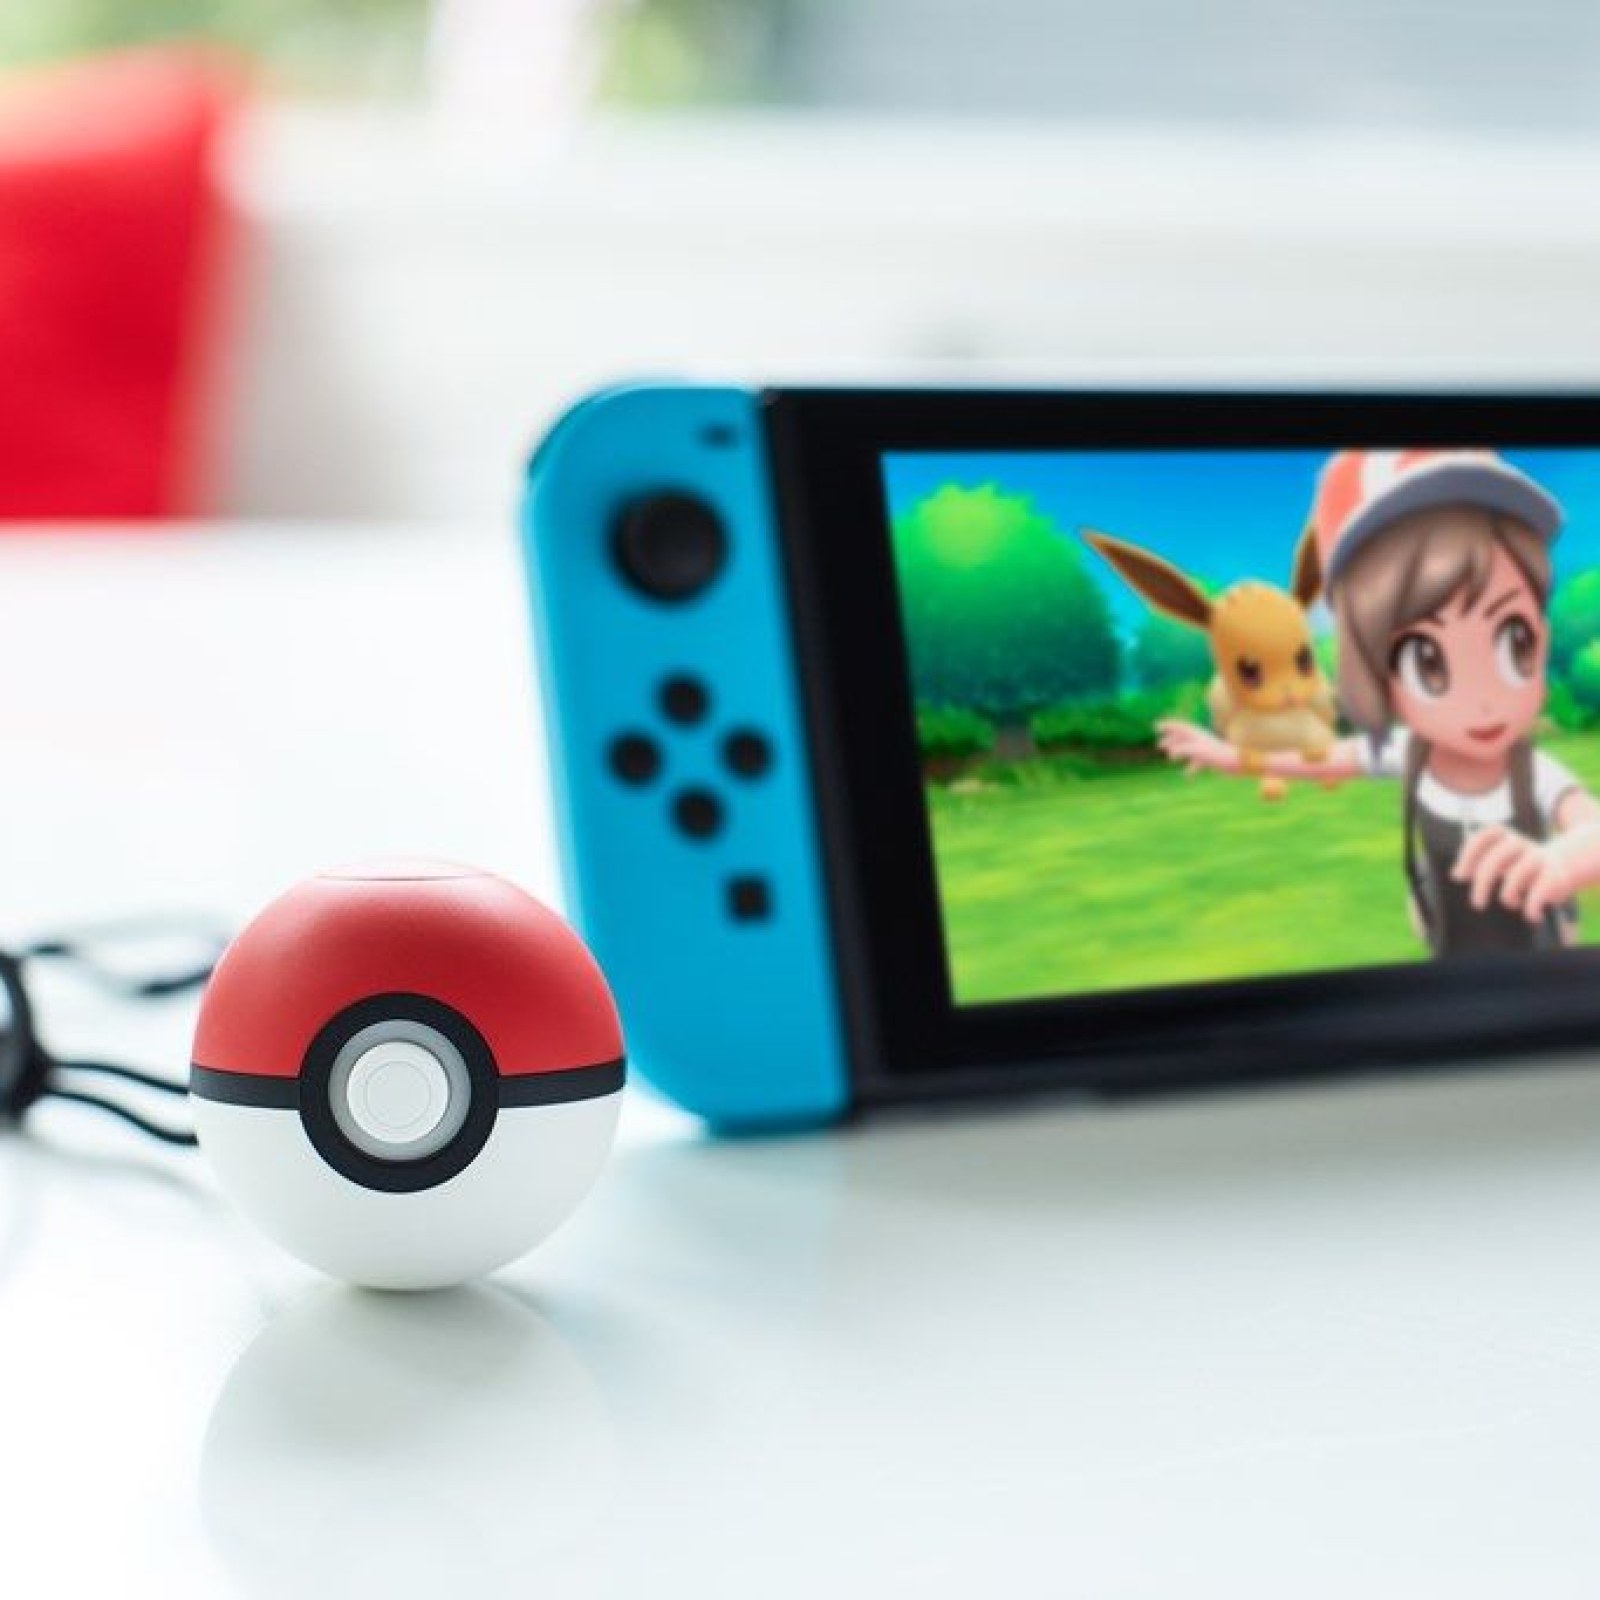 Pokemon Let S Go How To Pair And Transfer From Pokemon Go